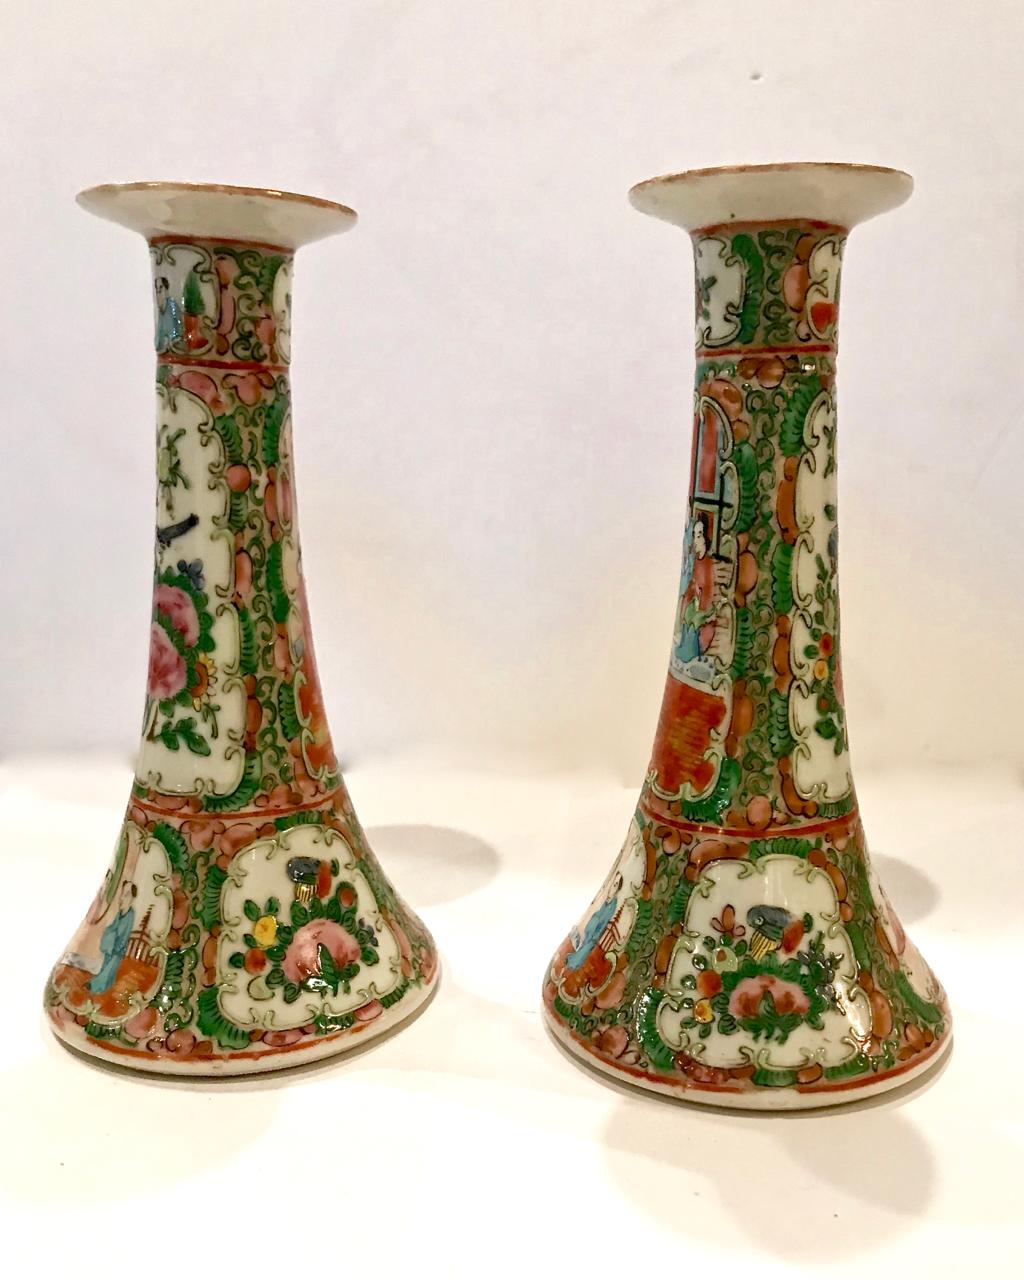 This is an iconic pair of mid-19th century Chinese Export Rose Canton candlesticks that date to circa 1860-1870. Both candlesticks are in very good condition with very minor rubbing to edges. Unmarked.